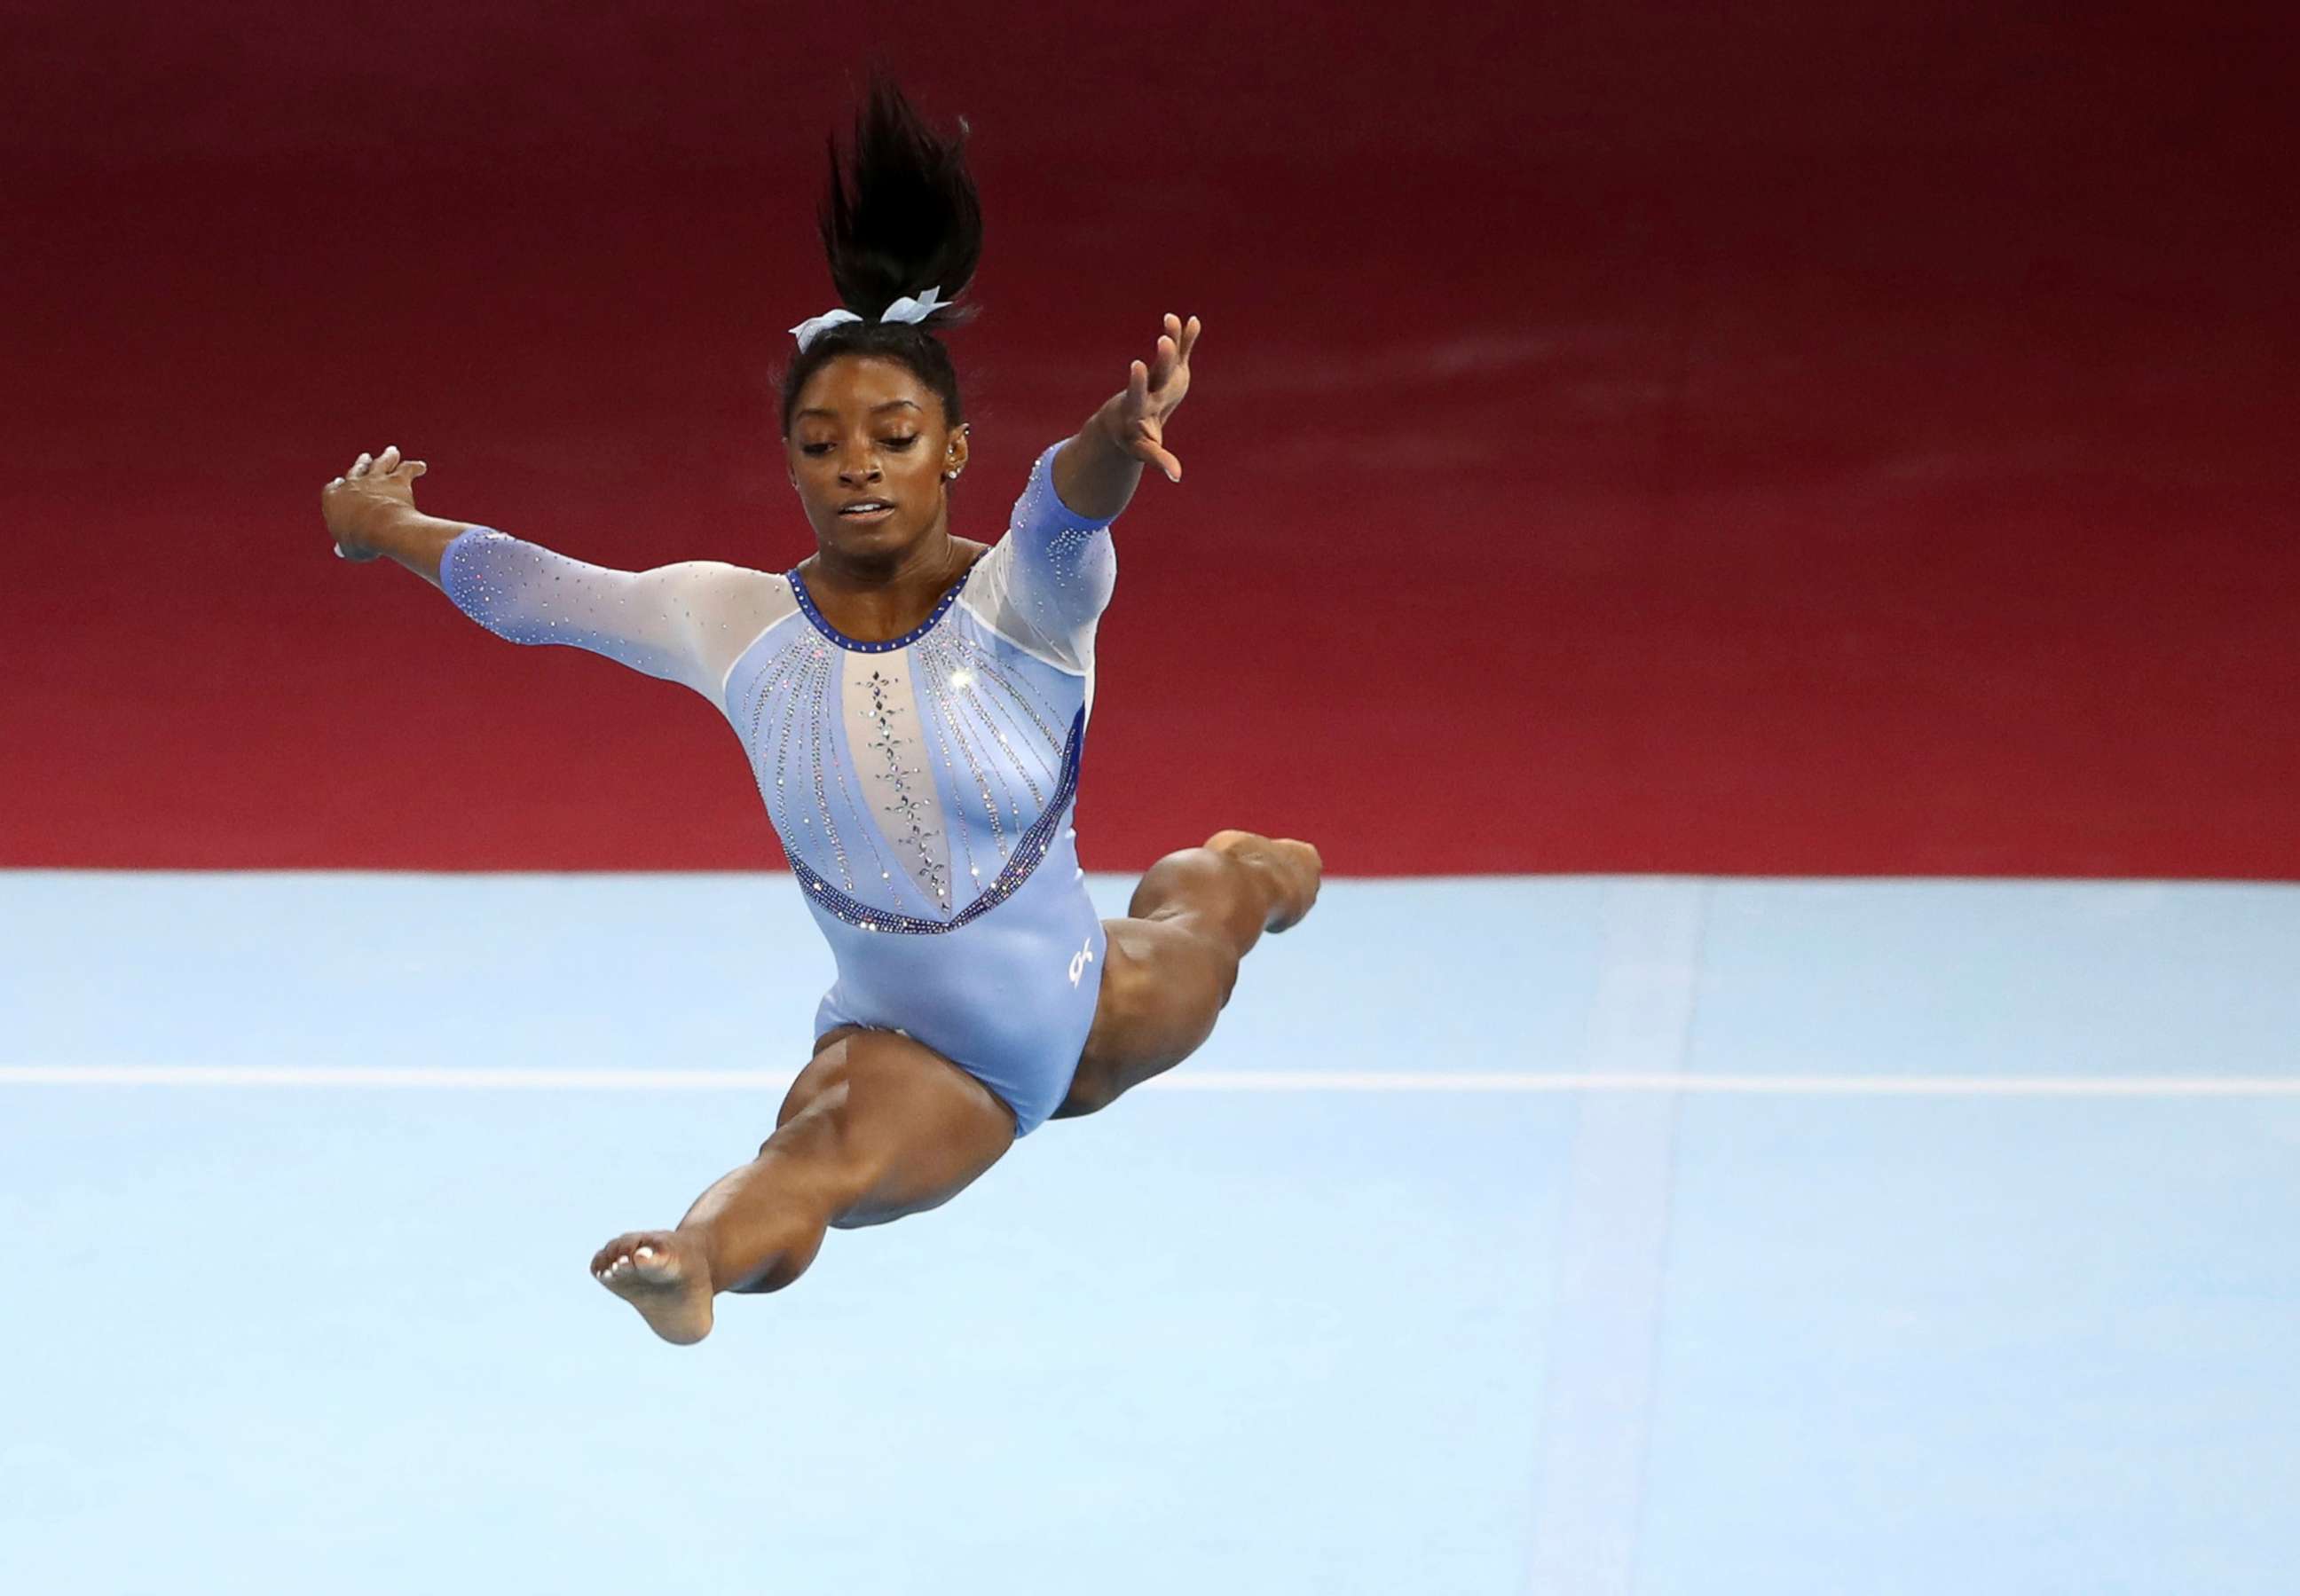 PHOTO: Simone Biles performed the triple-double, officially to be named the Biles II, in her floor routine at the World Artistic Gymnastics Championships in Stuttgart, Germany on Oct. 5, 2019.